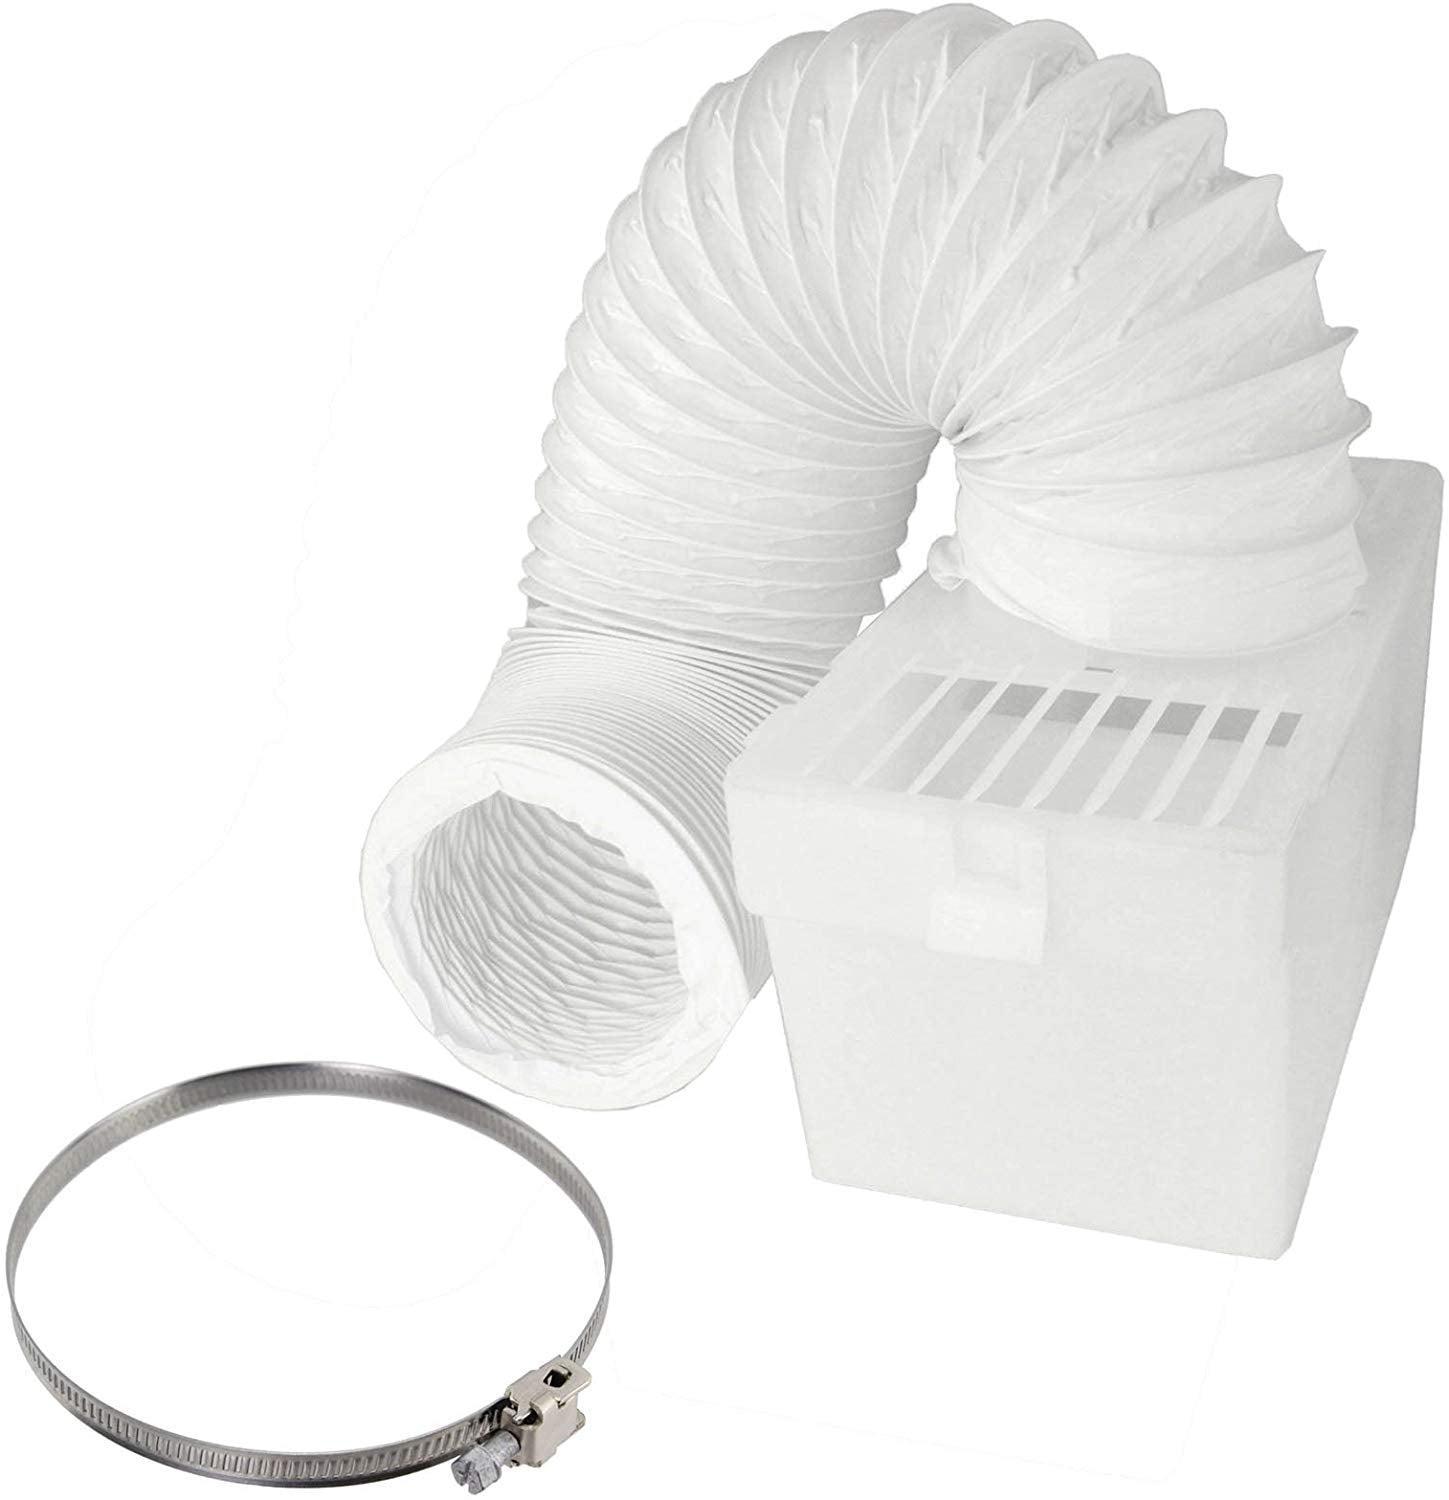 Condenser Vent Box & Hose Kit With Screw Clip for Hoover Vented Tumble Dryer (4" / 100mm Diameter)